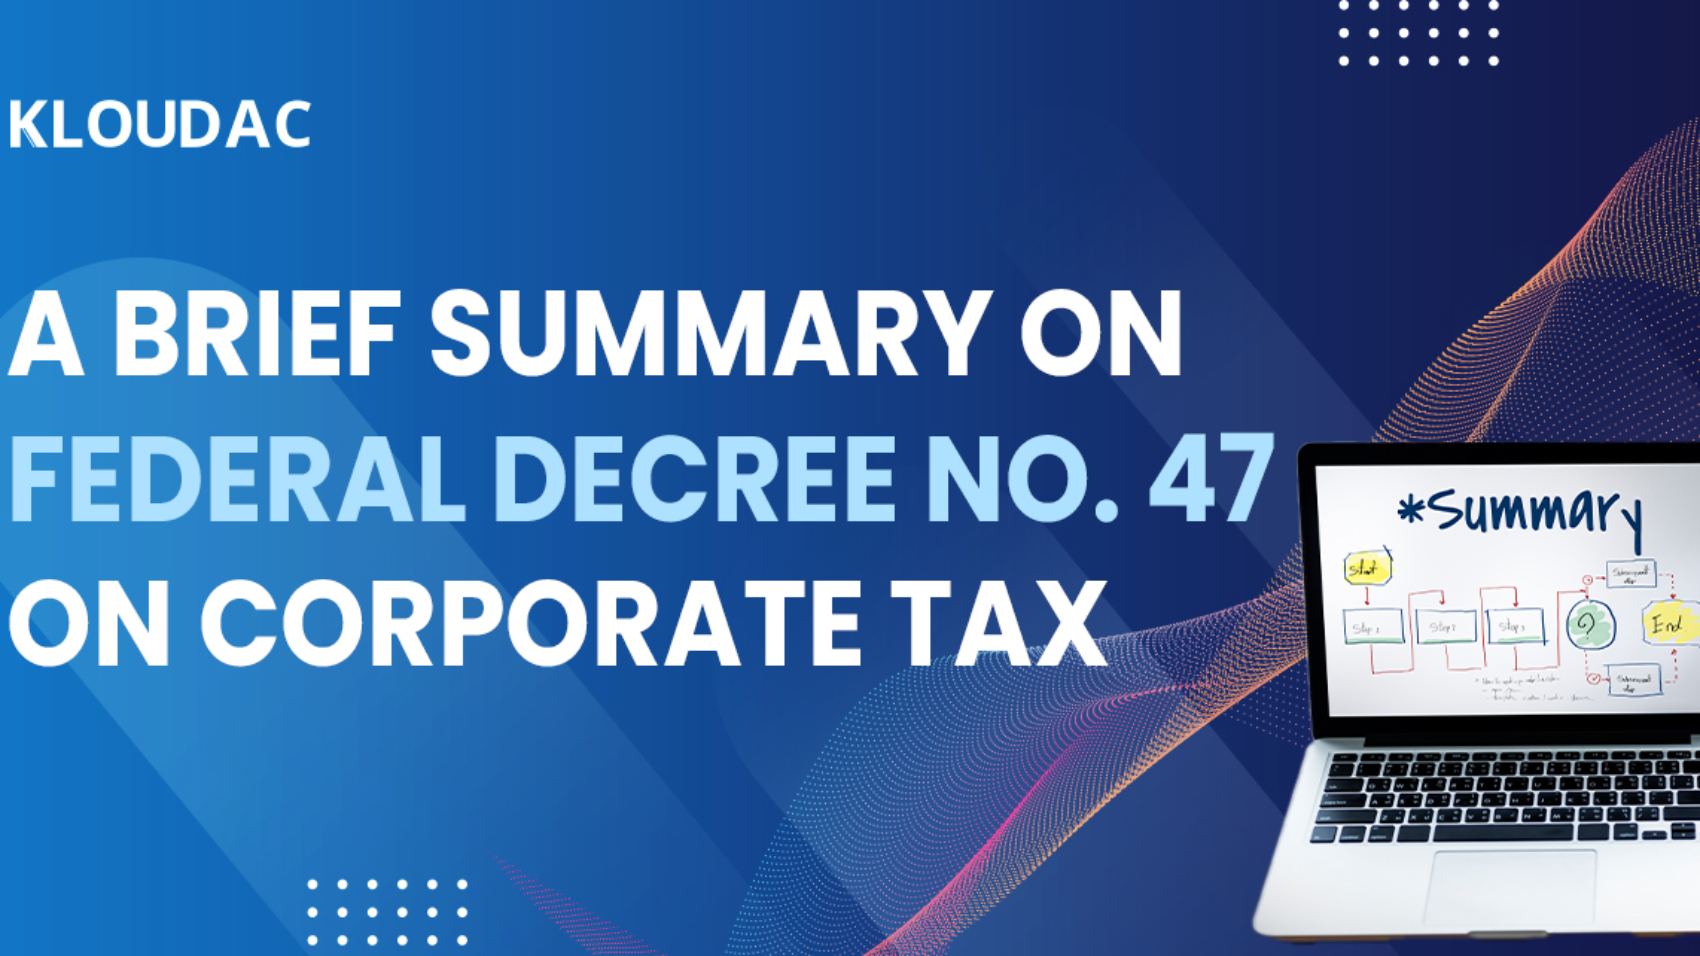 A Brief Summary on Federal Decree No. 47 on Corporate Tax